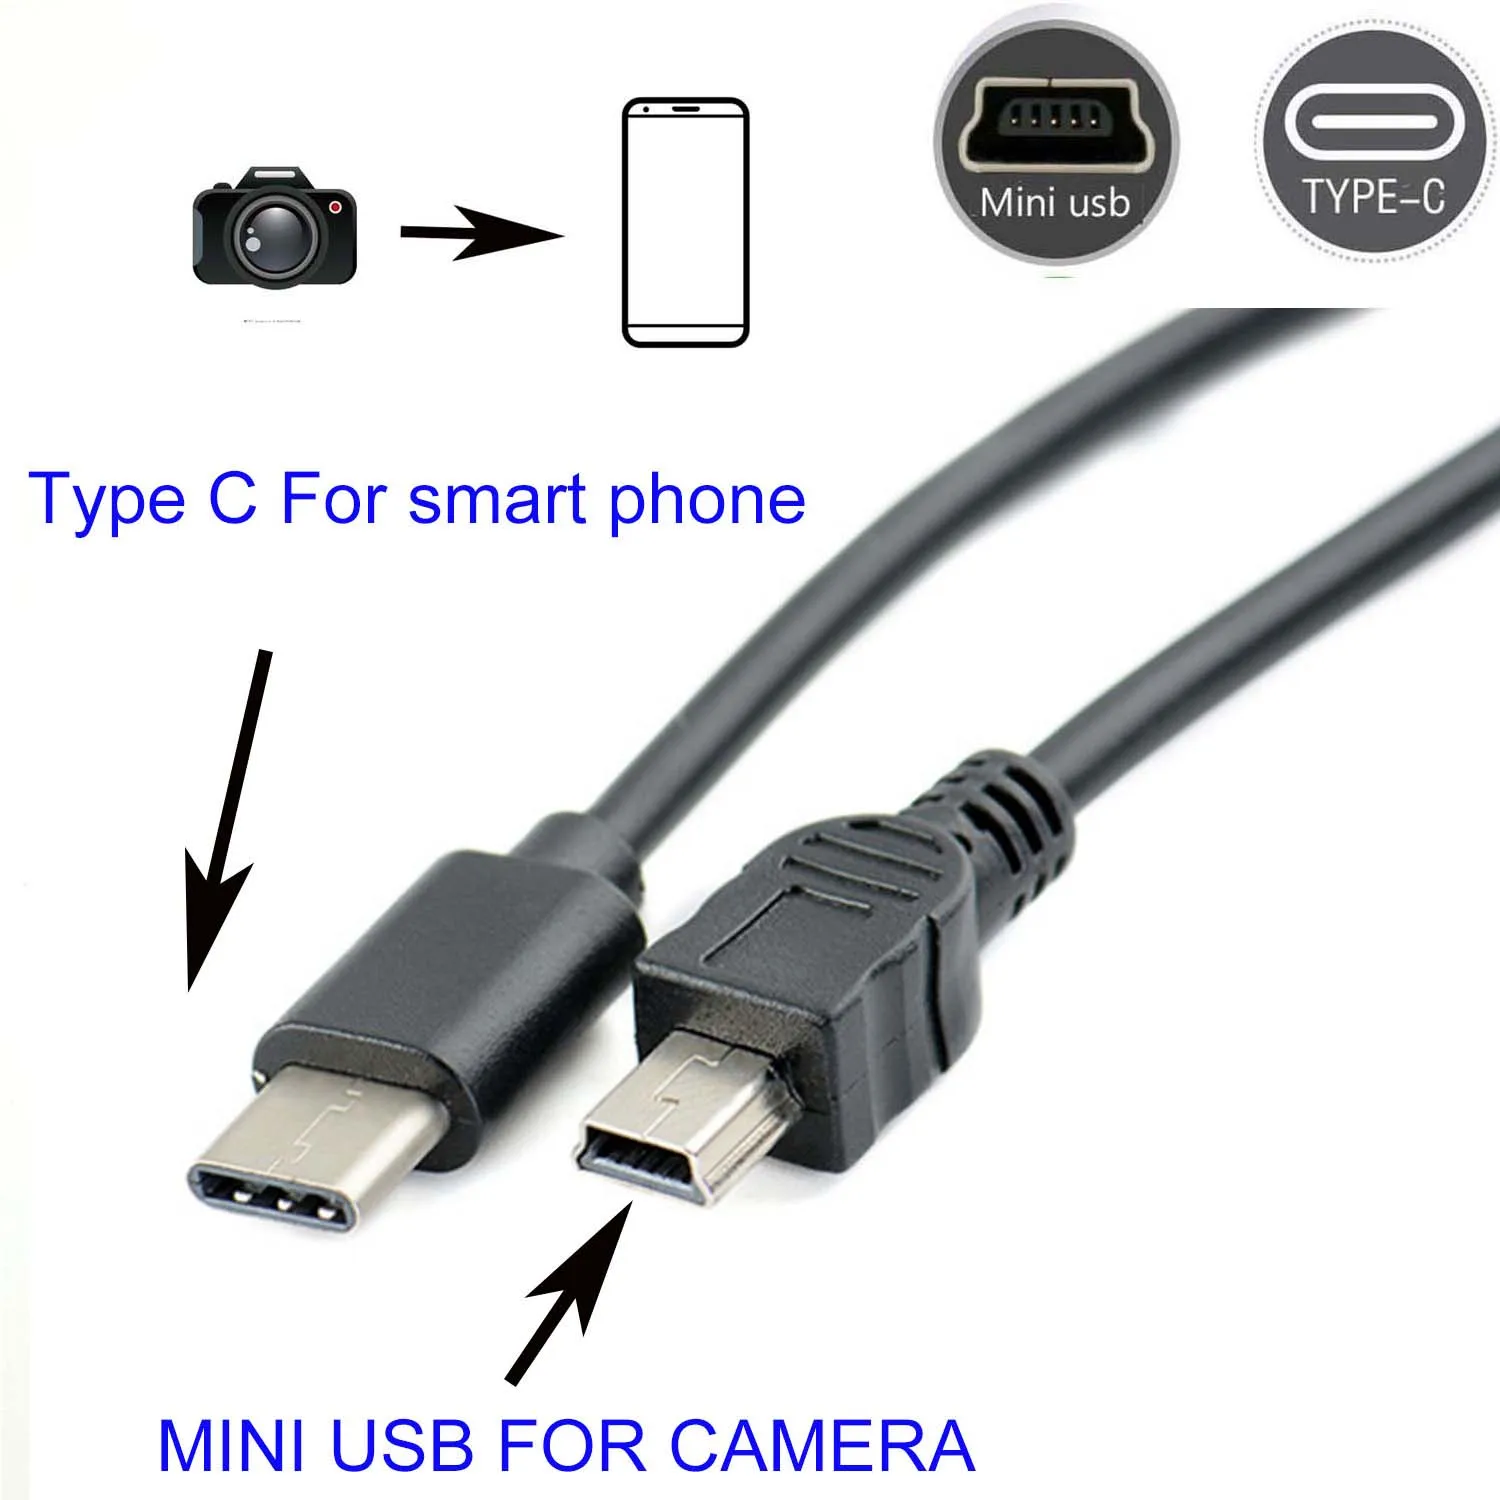 Type C To Mini Usb Cable For Canon 550d 600d 650d 500d 450d 60d 400d 1000d Camera Phone Picture Video - Data Cables - AliExpress